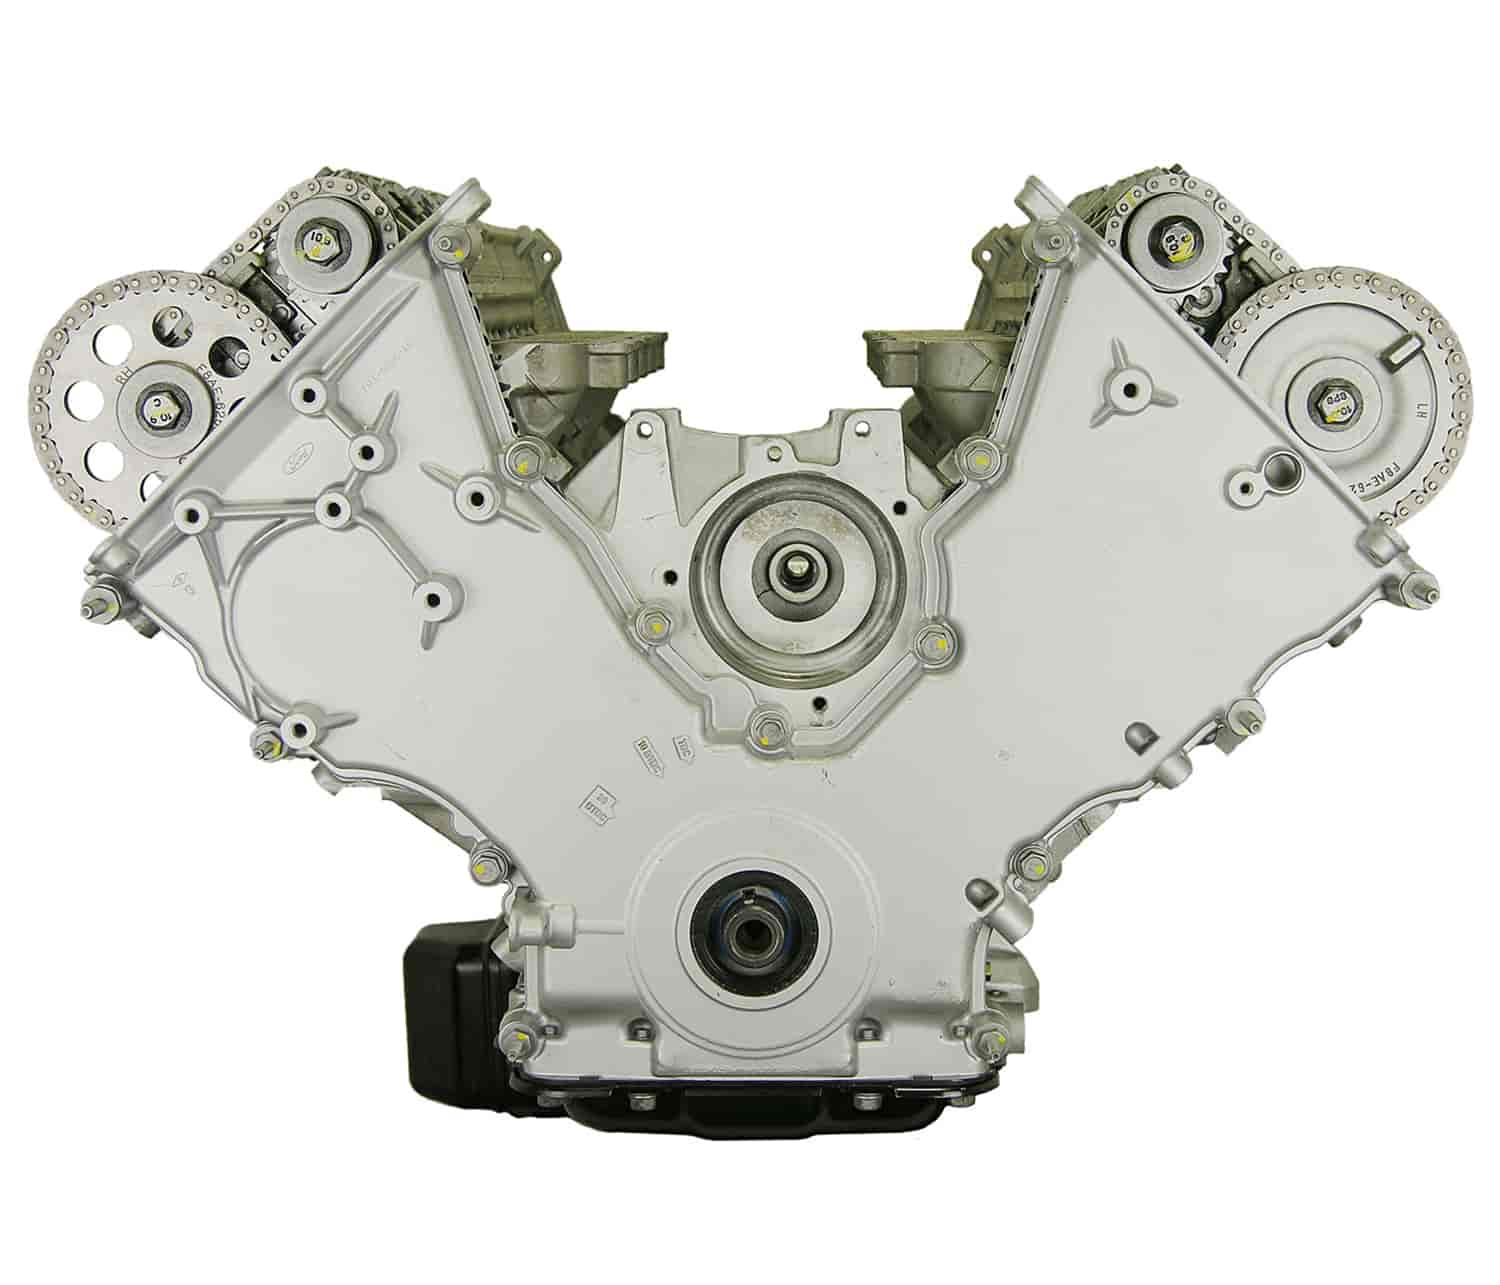 Remanufactured Crate Engine for 1993-1995 Lincoln Mark VIII